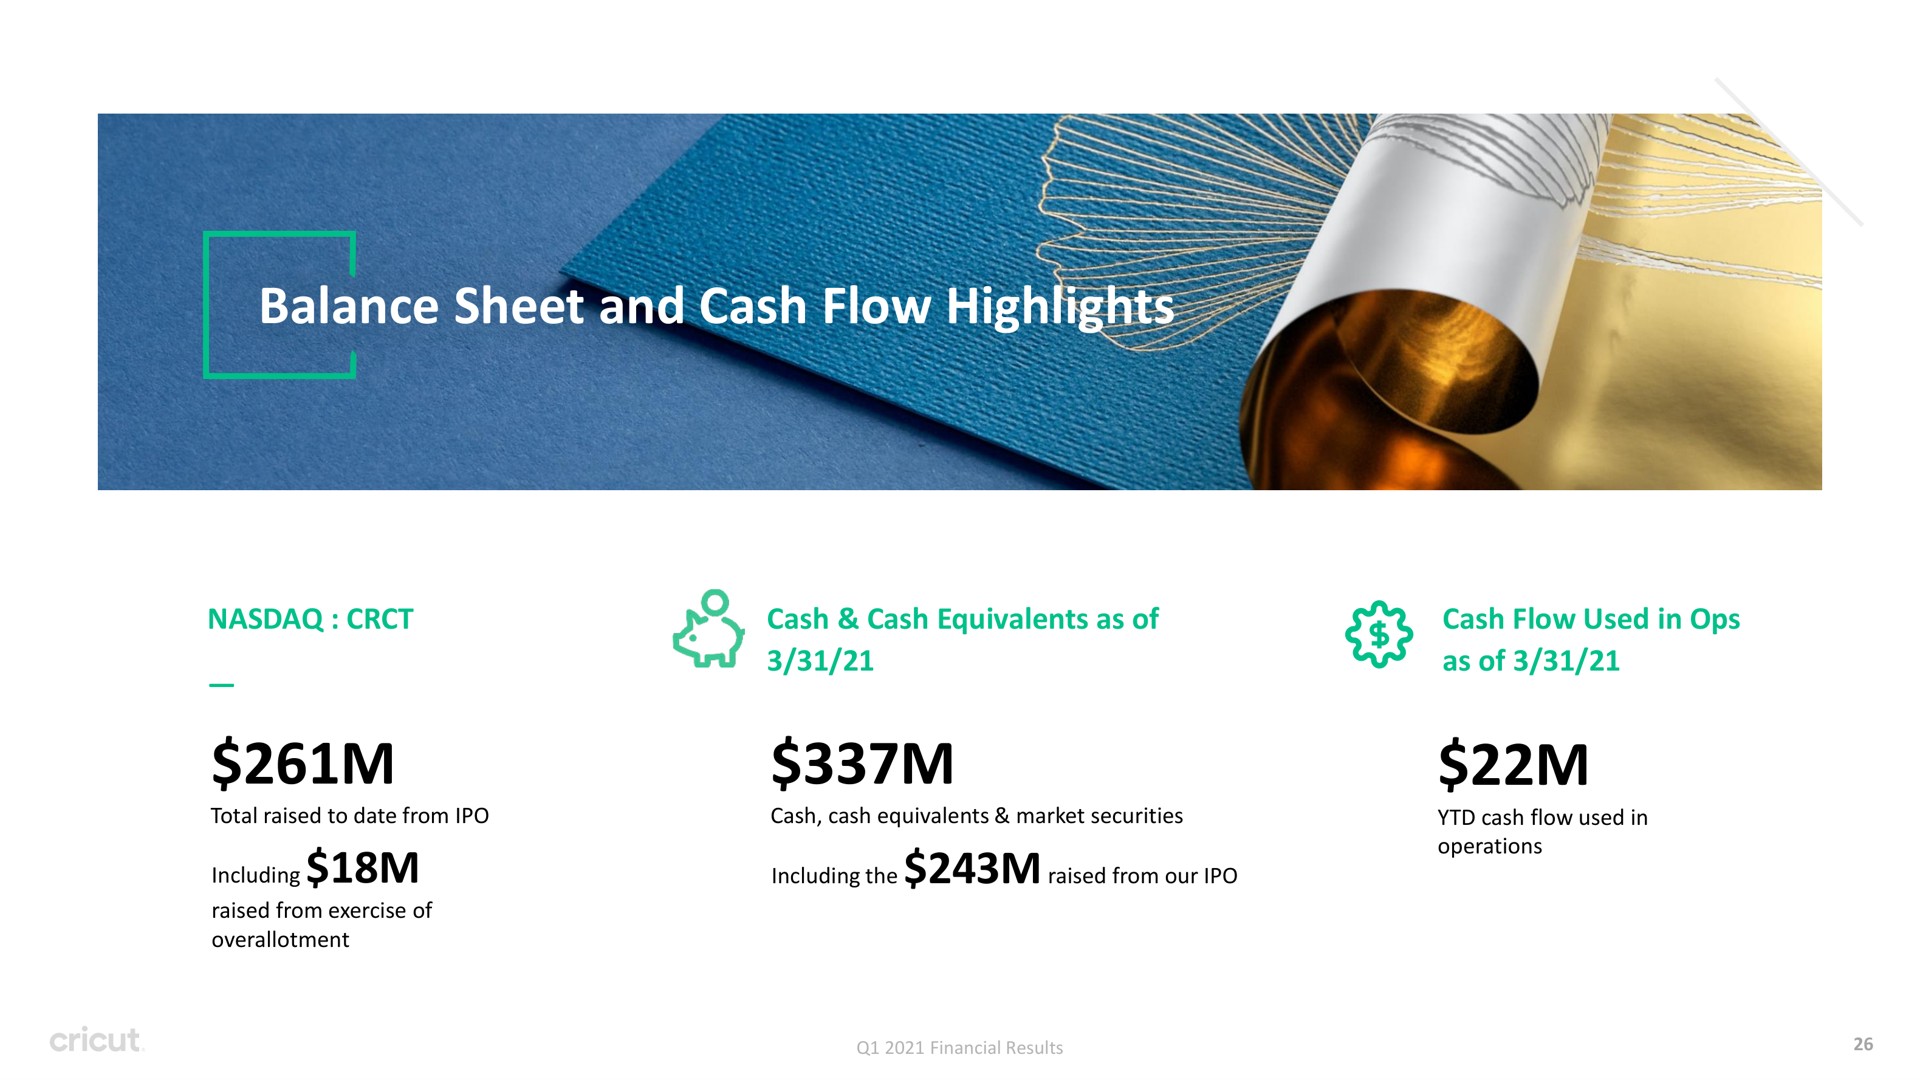 balance sheet and cash flow highlights so high equivalents as of total raised to date from equivalents market securities including raised from exercise of including the raised from our used in as of used in operations | Circut